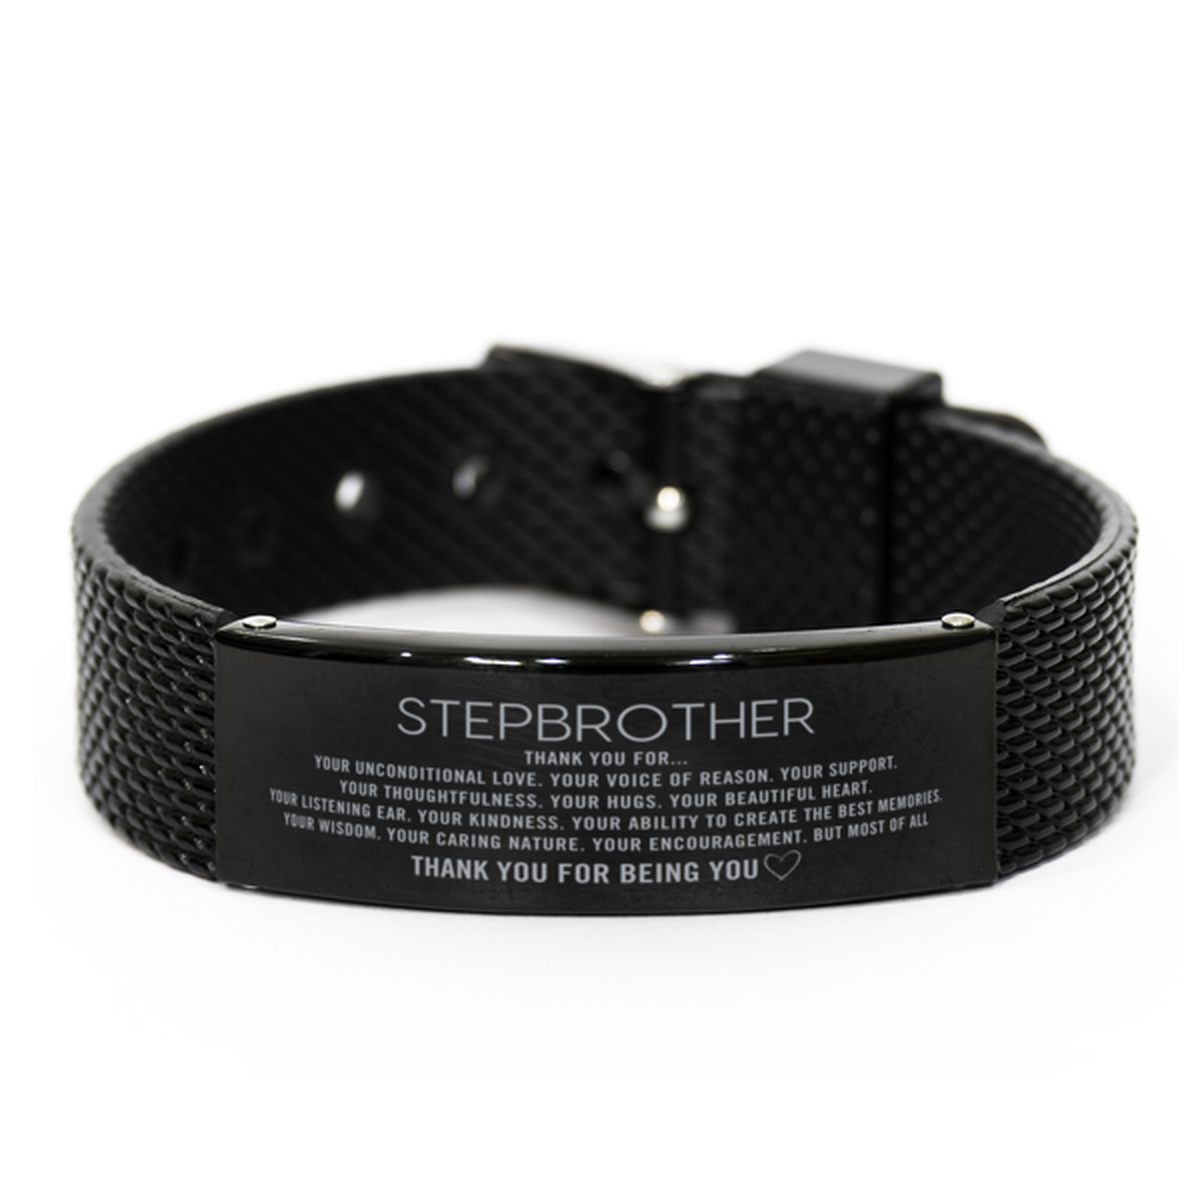 Stepbrother Black Shark Mesh Bracelet Custom, Engraved Gifts For Stepbrother Christmas Graduation Birthday Gifts for Men Women Stepbrother Thank you for Your unconditional love